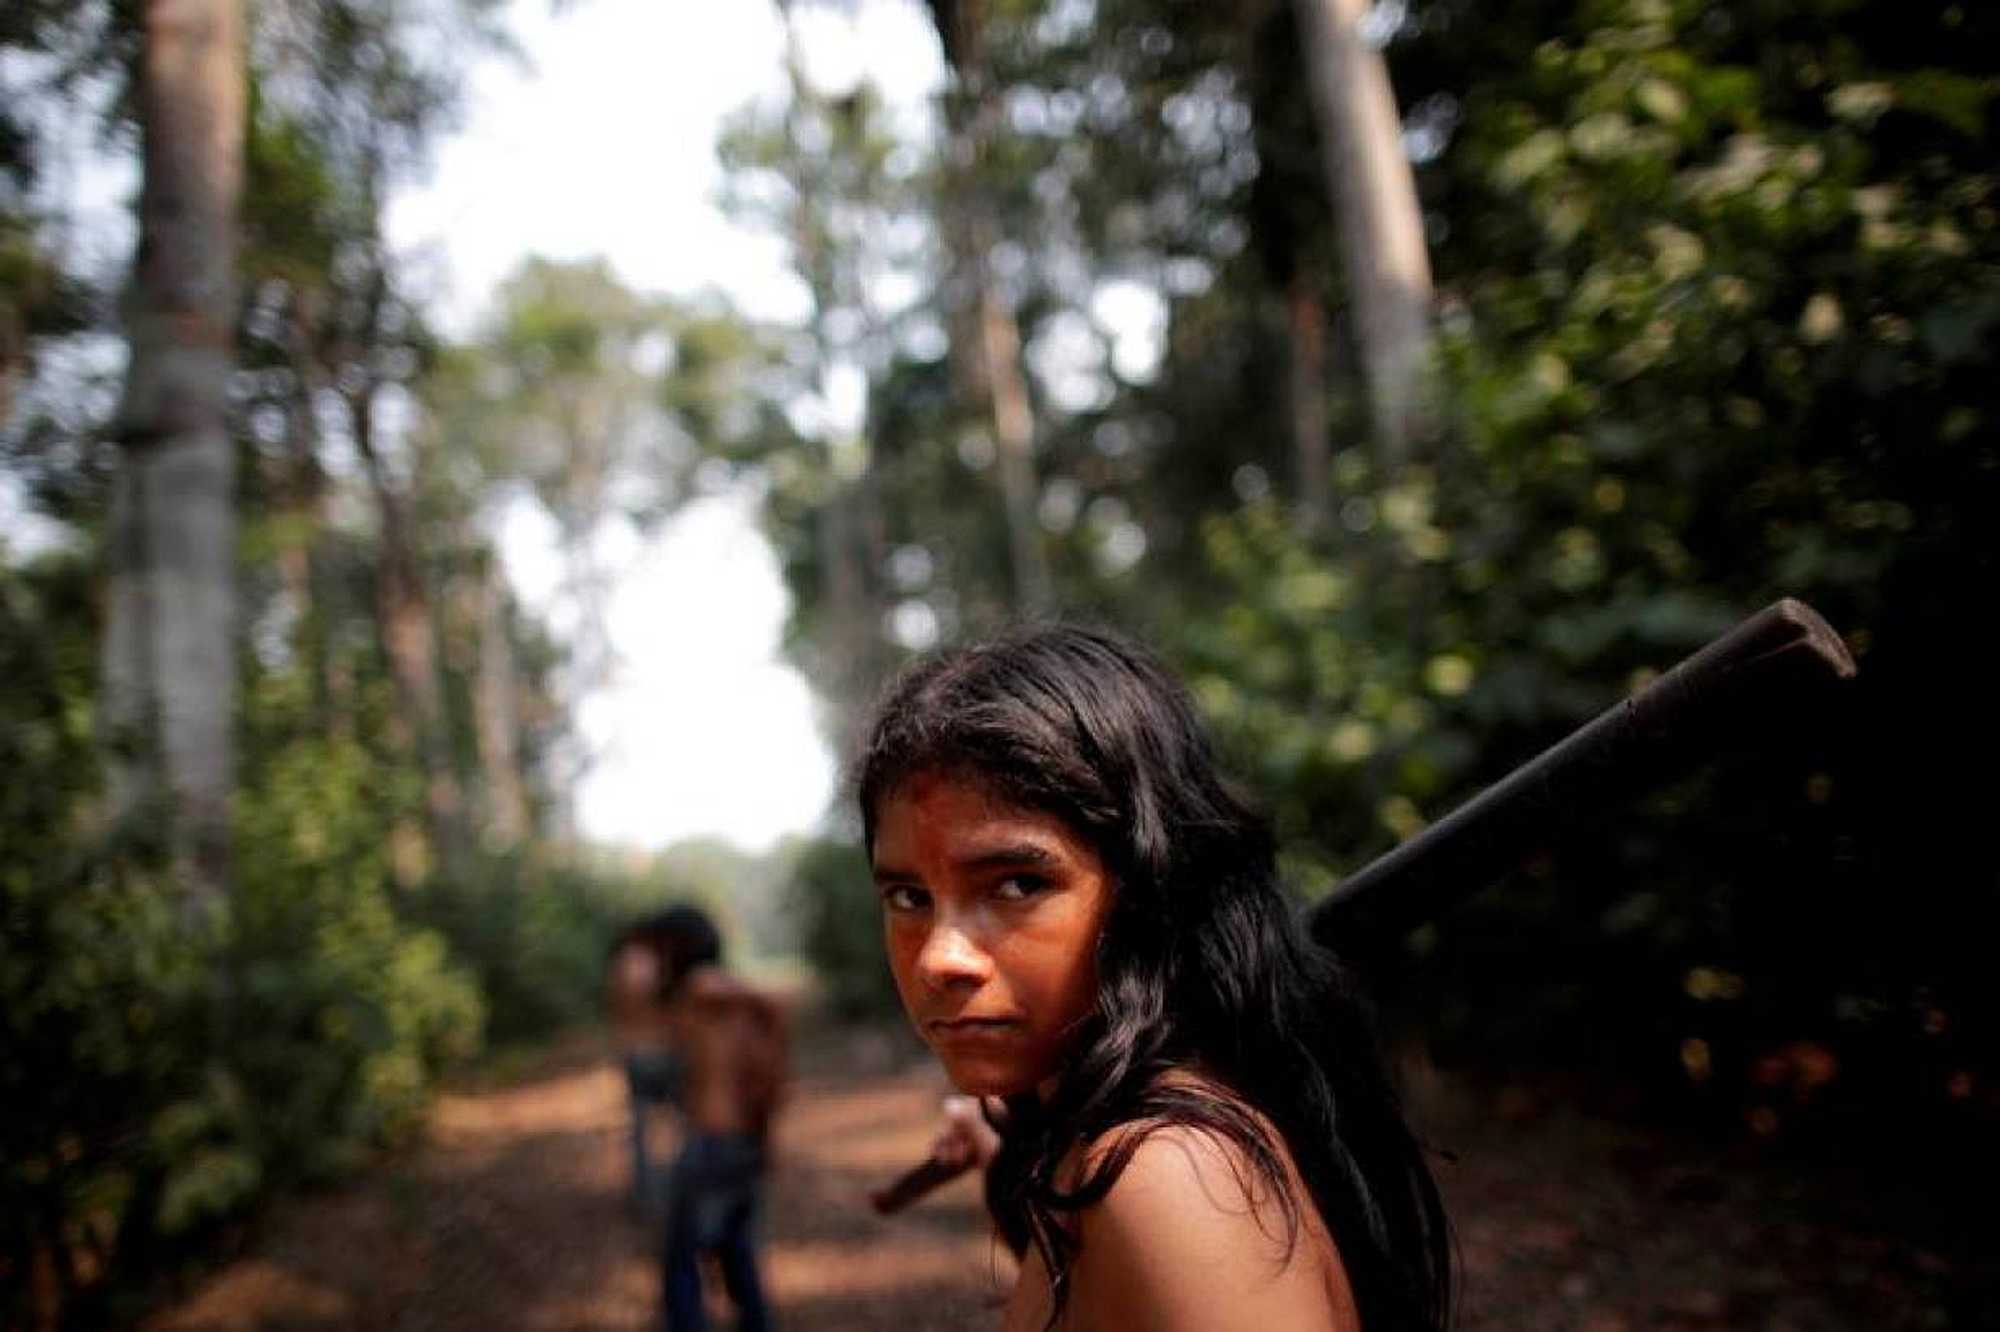 Pedro Mura, from the Mura tribe, reacts in front of a deforested area inside the Amazon rainforest - REUTERS/Ueslei Marcelino